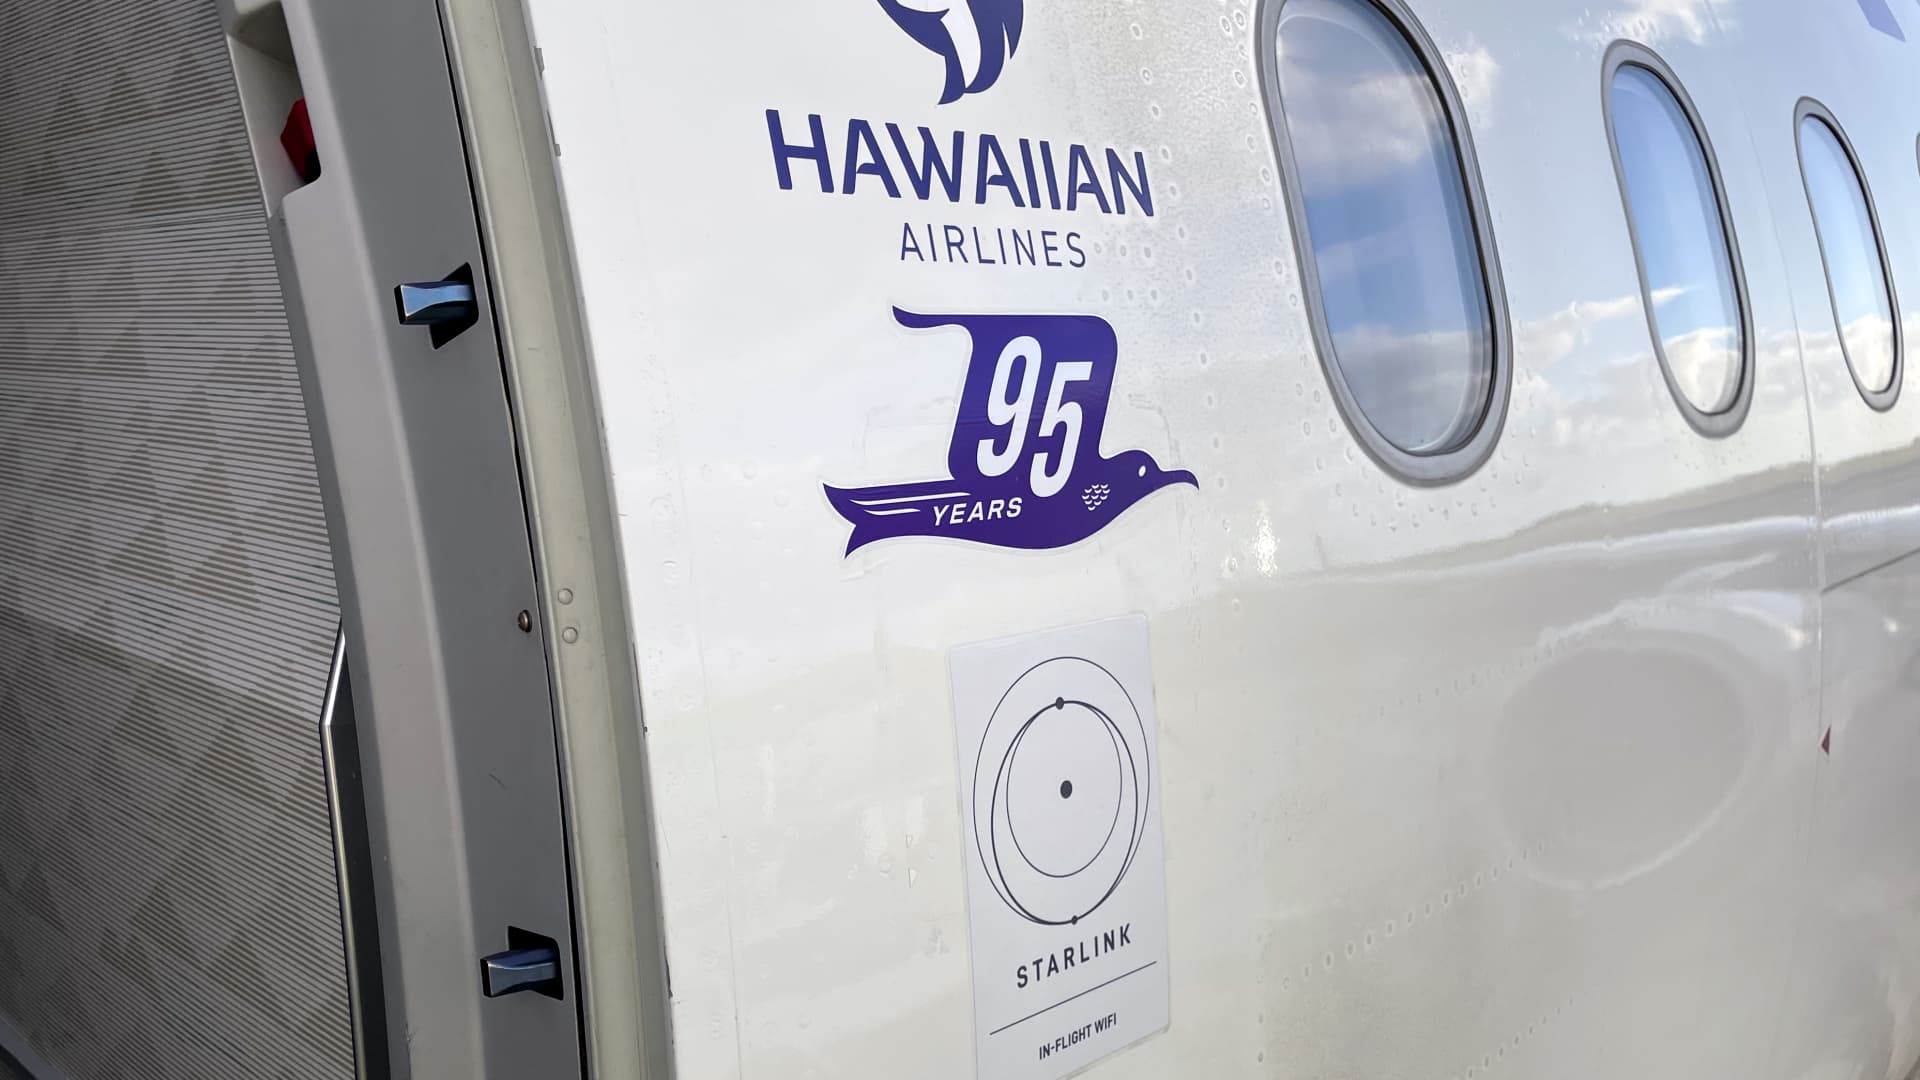 Hawaiian Airways debuts free inflight Wi-Fi from SpaceX’s Starlink